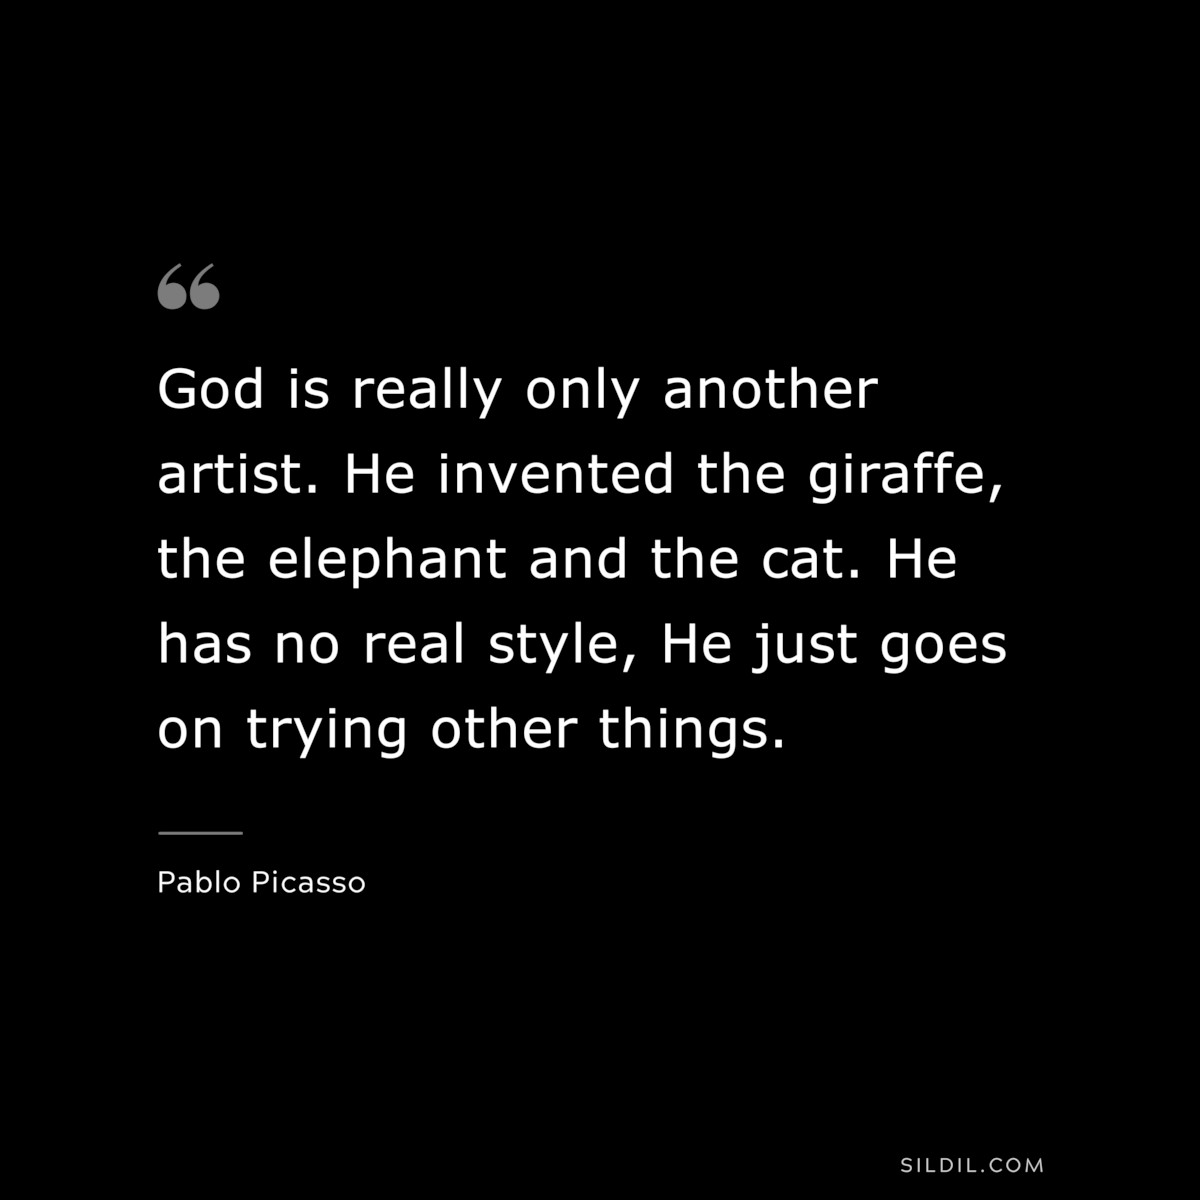 God is really only another artist. He invented the giraffe, the elephant and the cat. He has no real style, He just goes on trying other things. ― Pablo Picasso